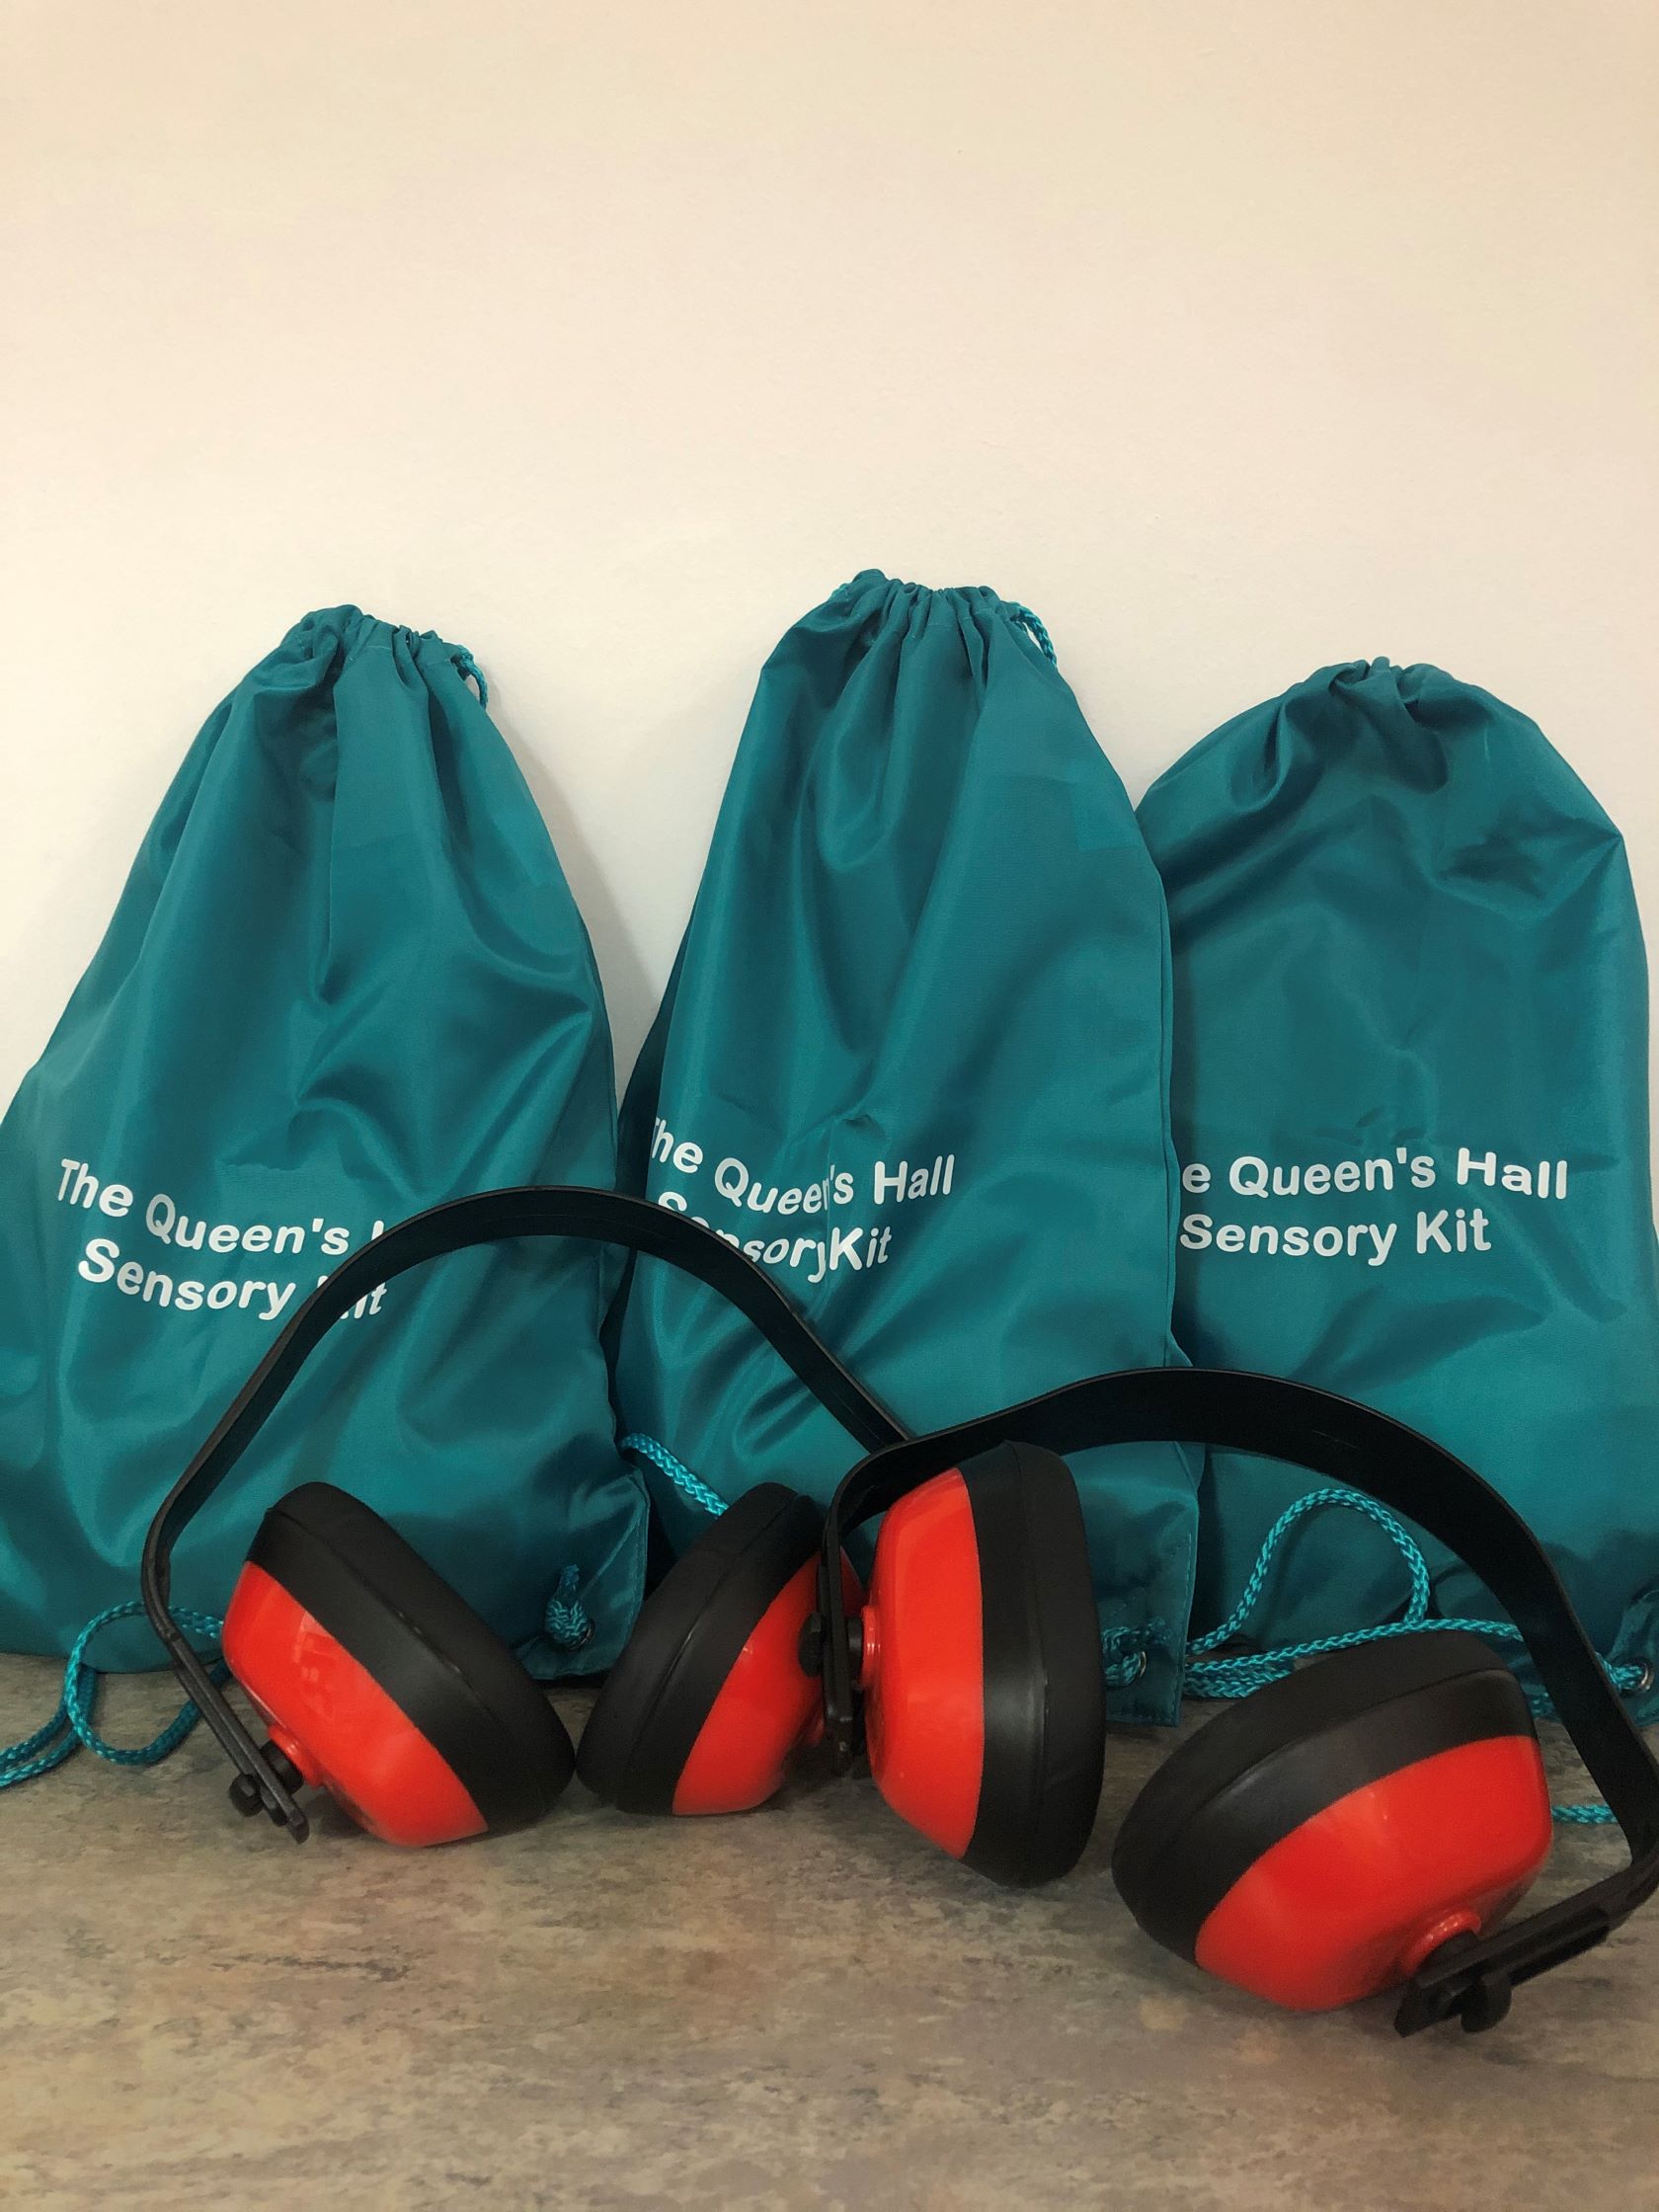 Three green bags with white writing saying The Queen's Hall Sensory Kit and three sets of ear denfenders